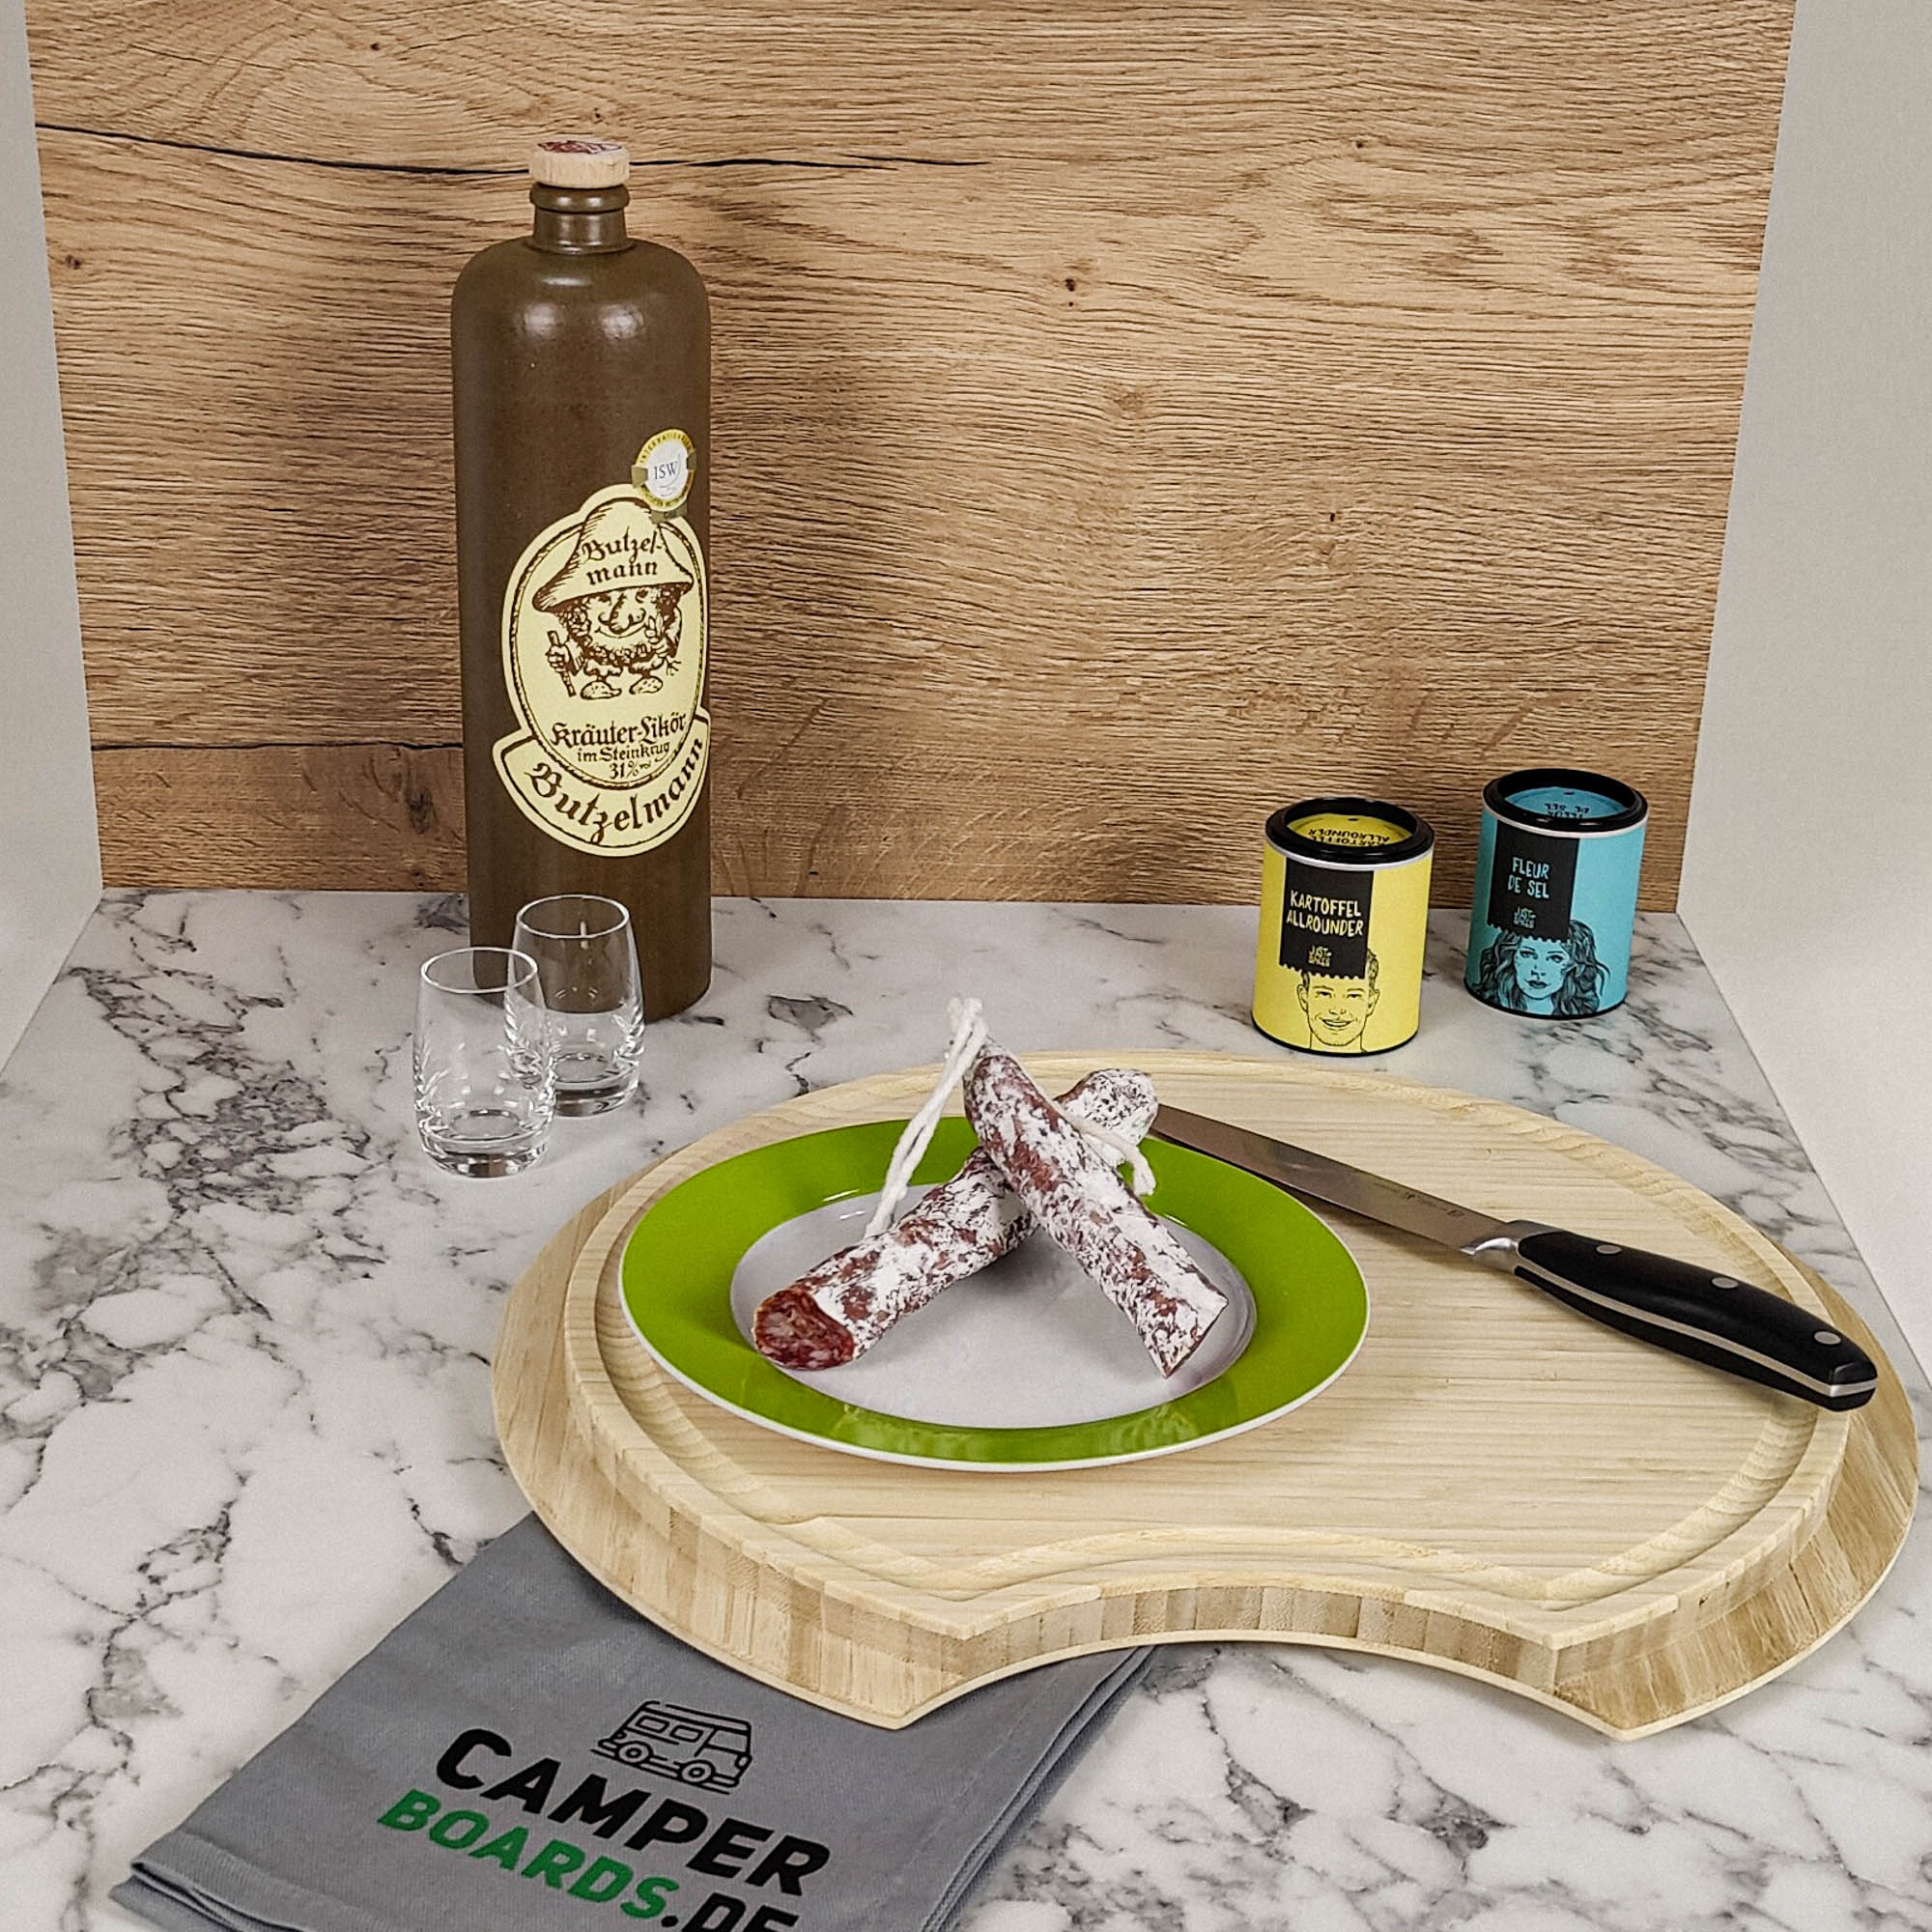 Cutting board with sink cover for Giottiline models